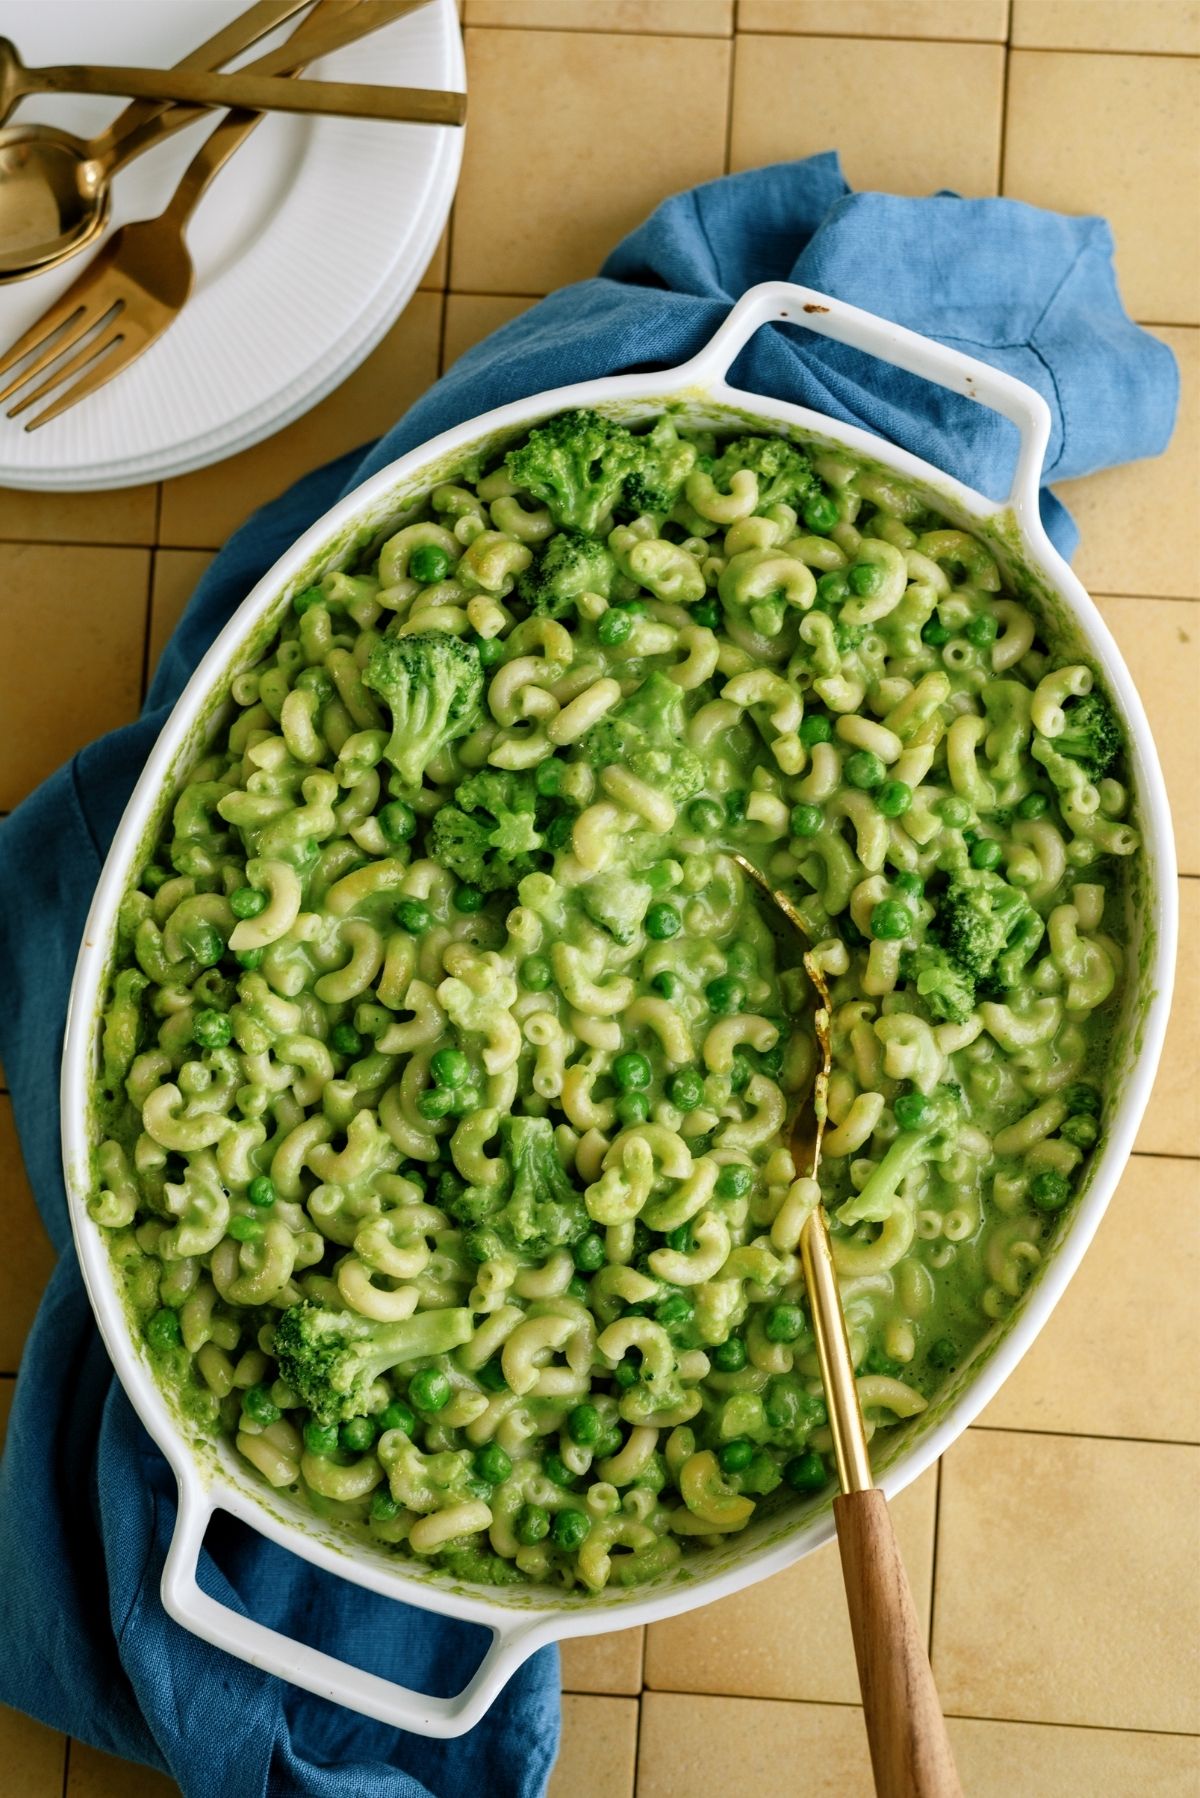 Green Mac and Cheese without Food Coloring in a baking dish with a serving spoon